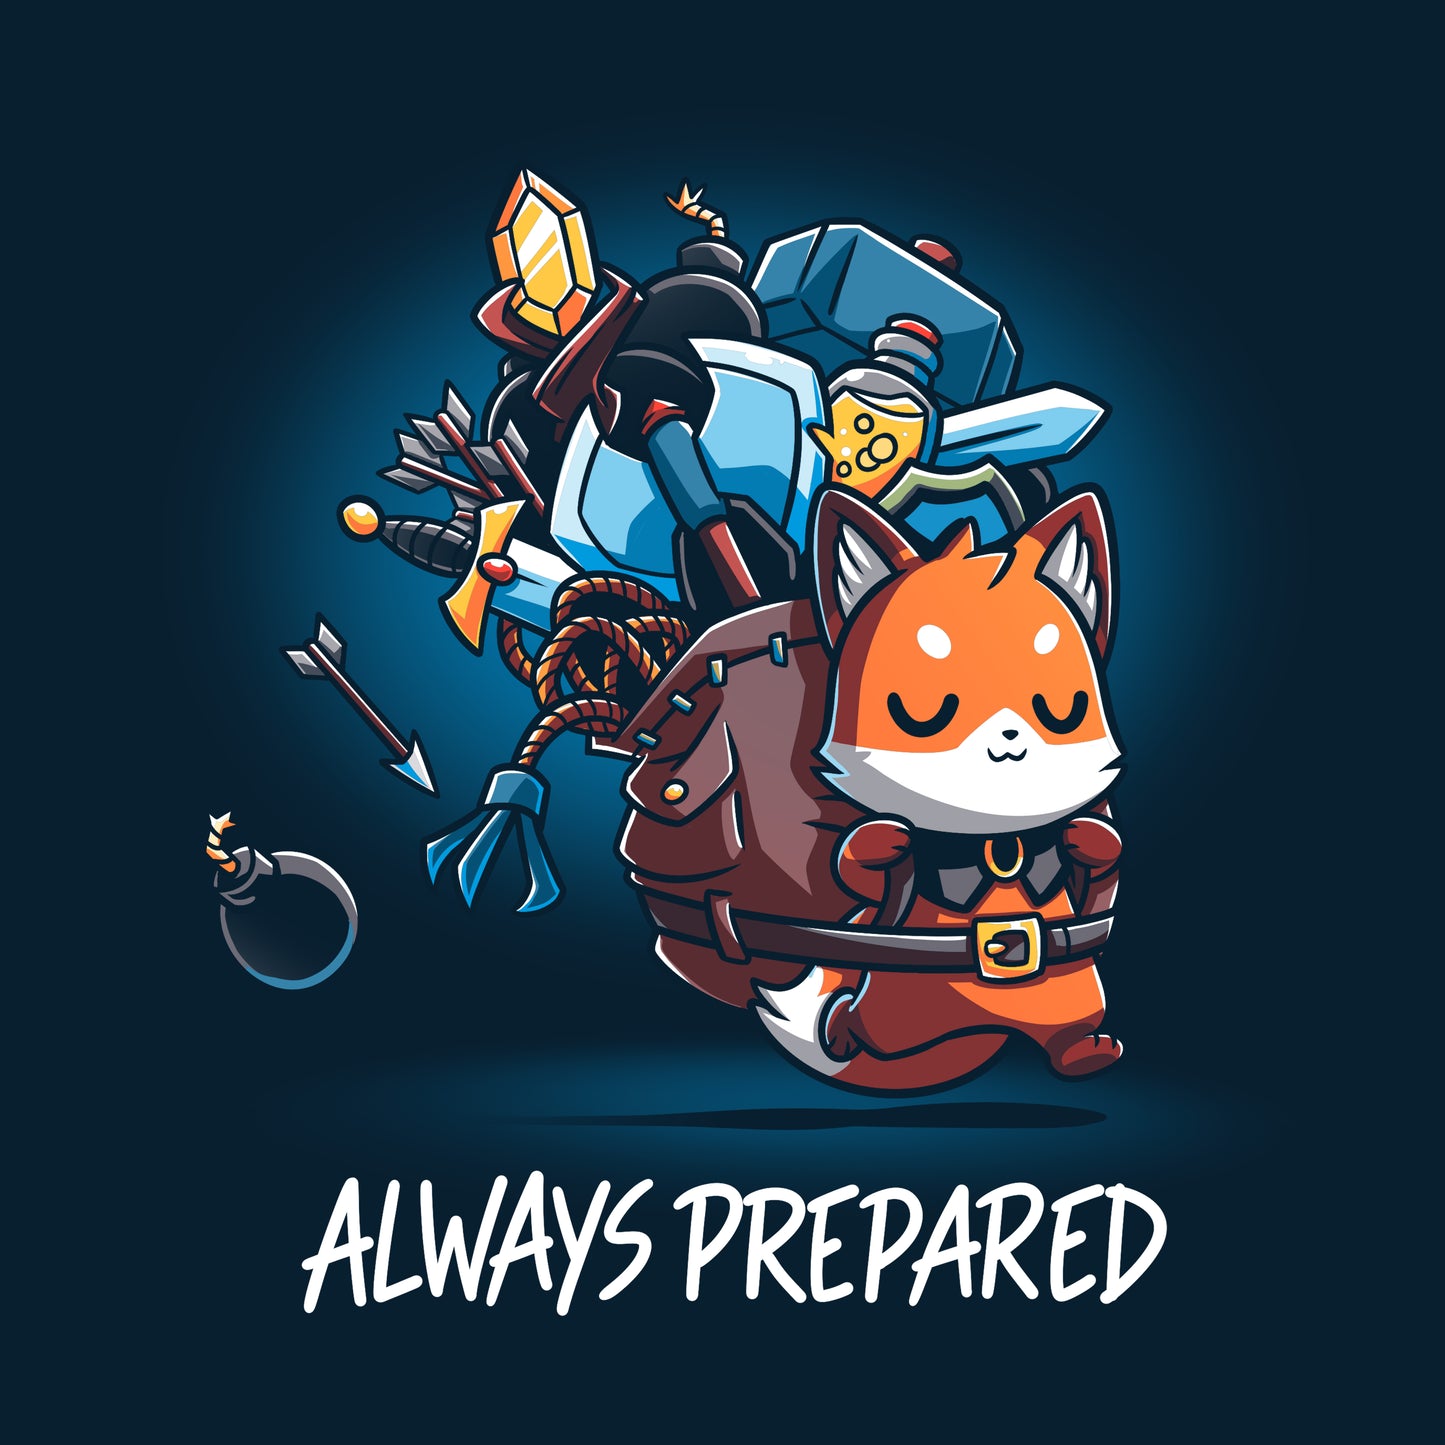 An Always Prepared TeeTurtle cartoon fox with a sword and other items on his back.